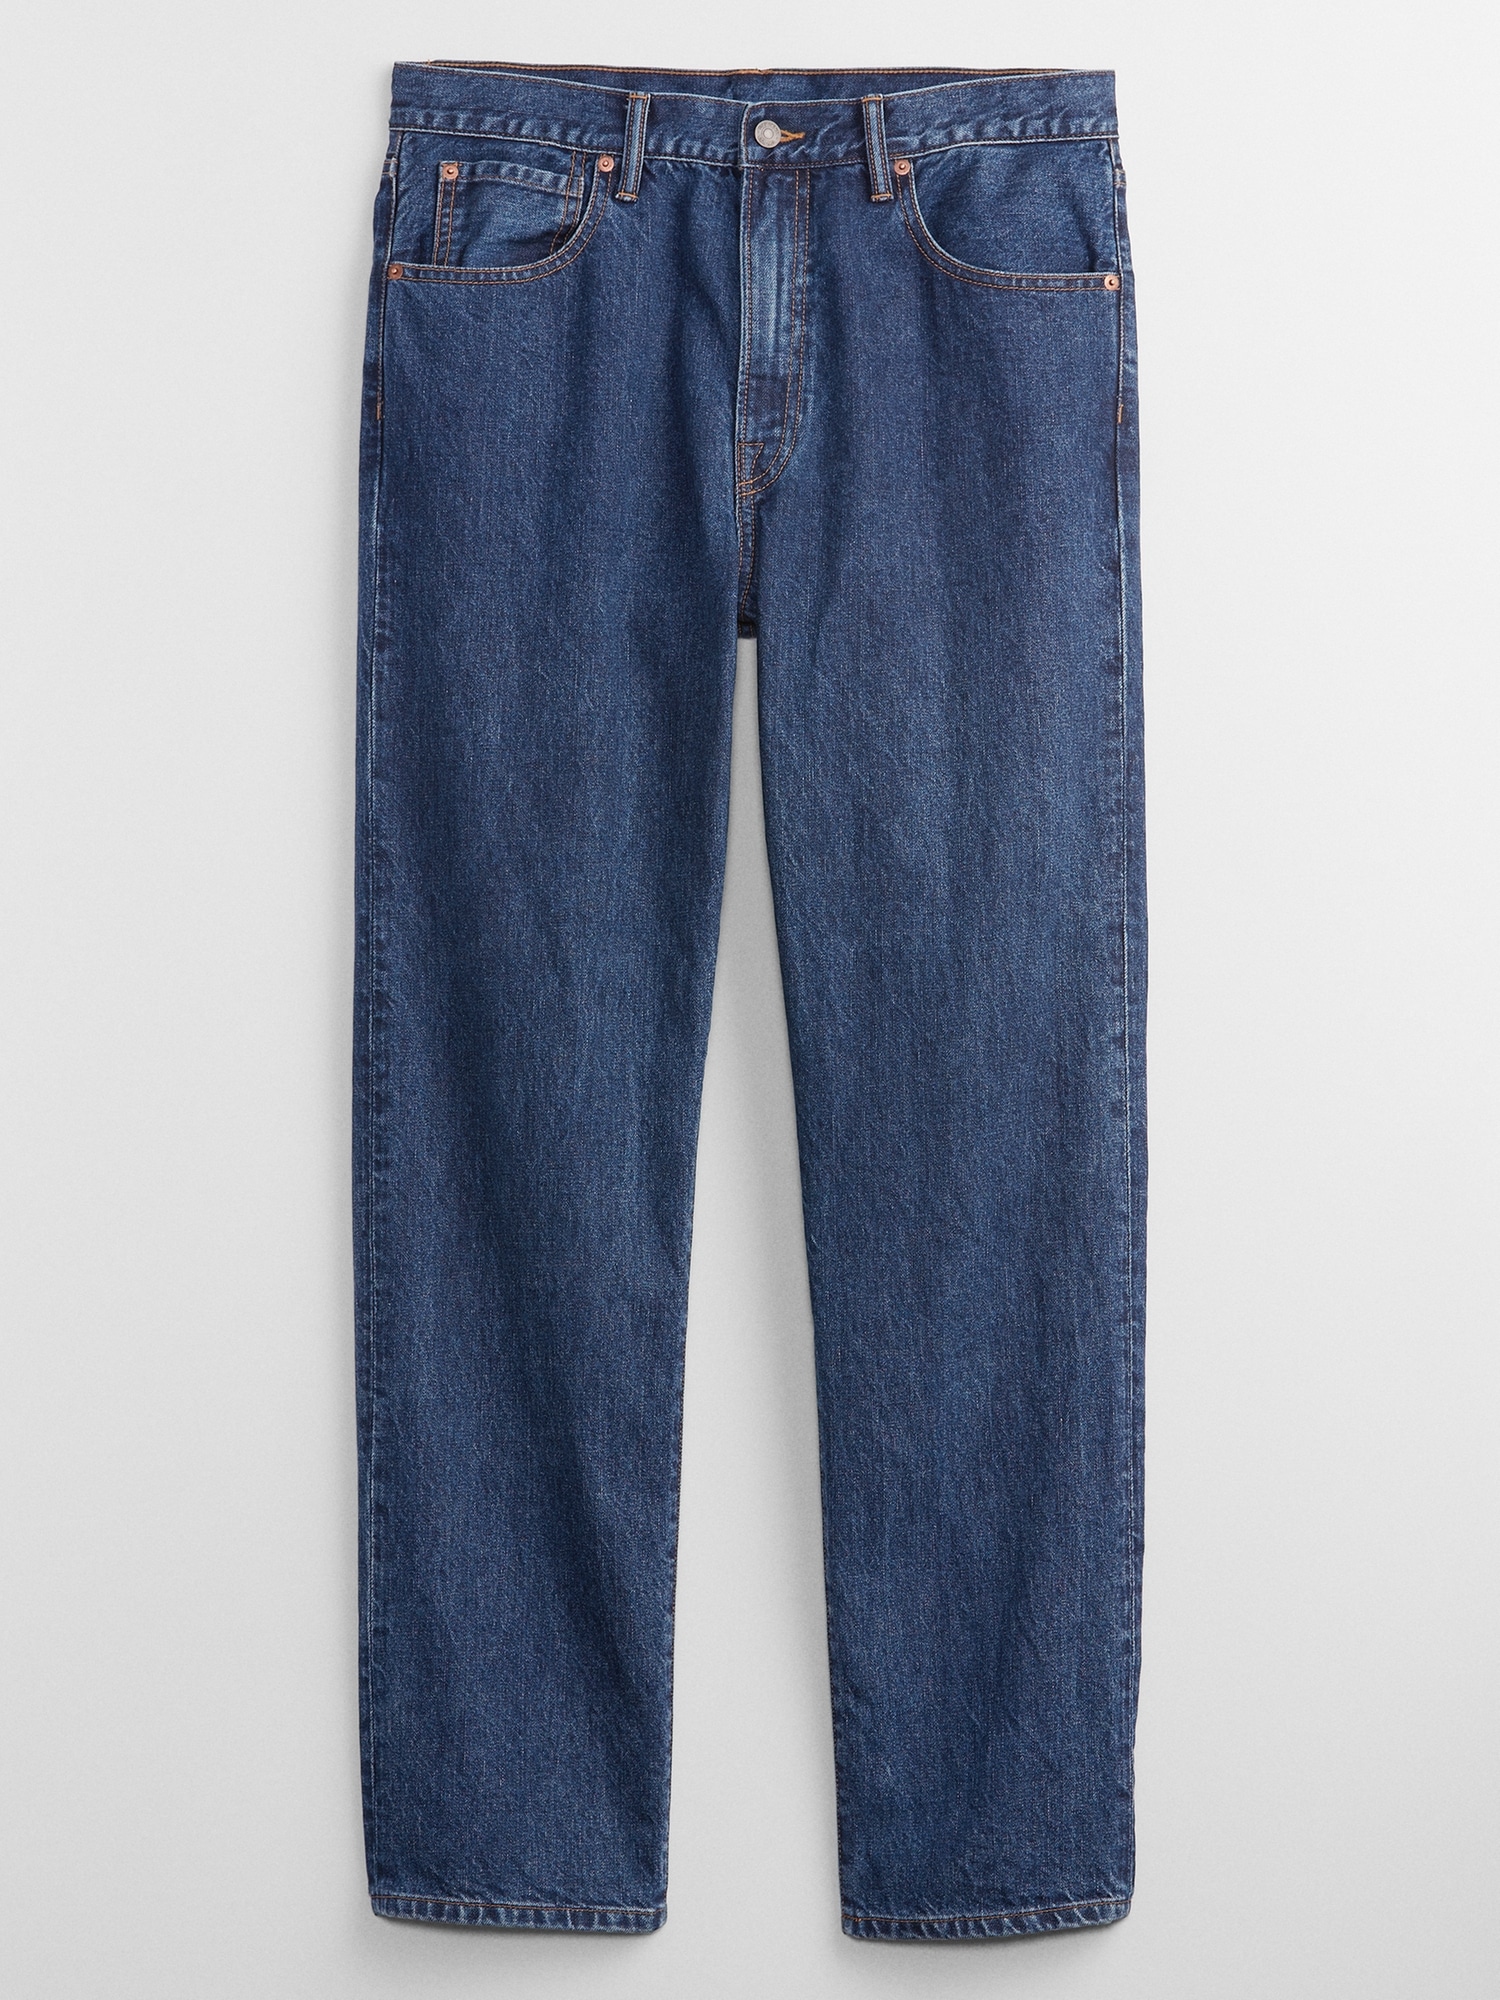 '90s Original Straight Jeans with Washwell | Gap Factory